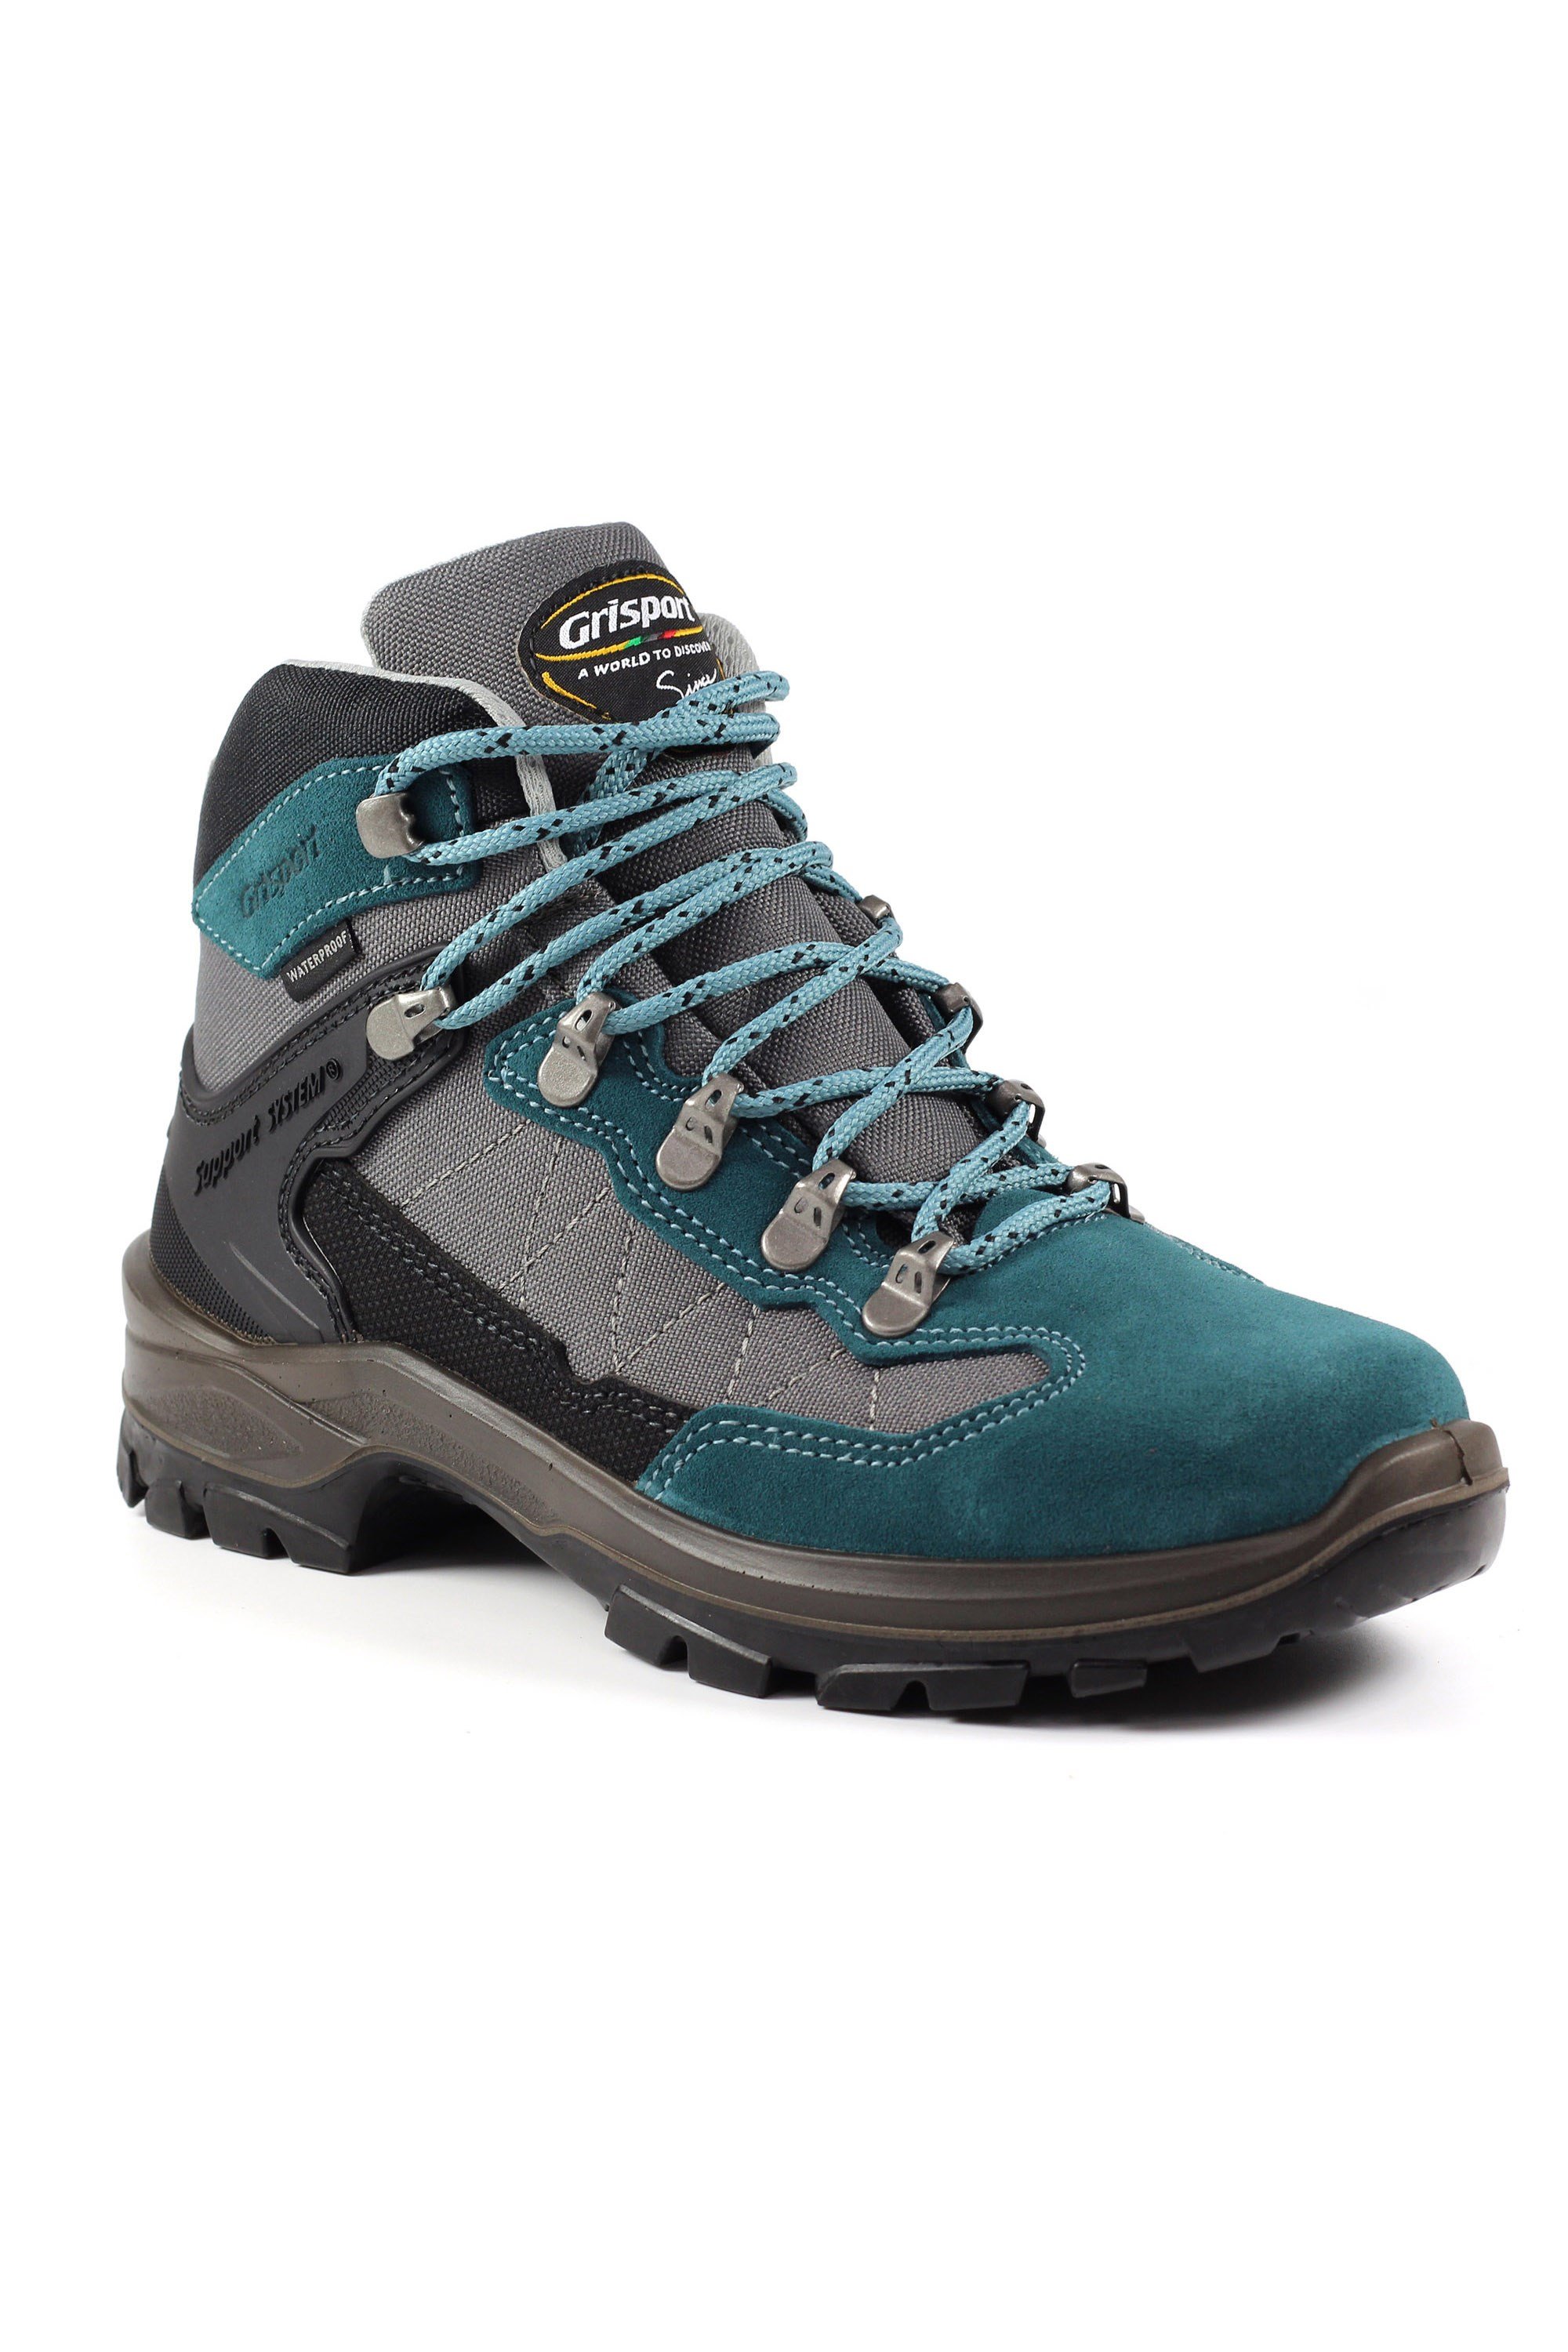 Excalibur Womens Walking Boots -